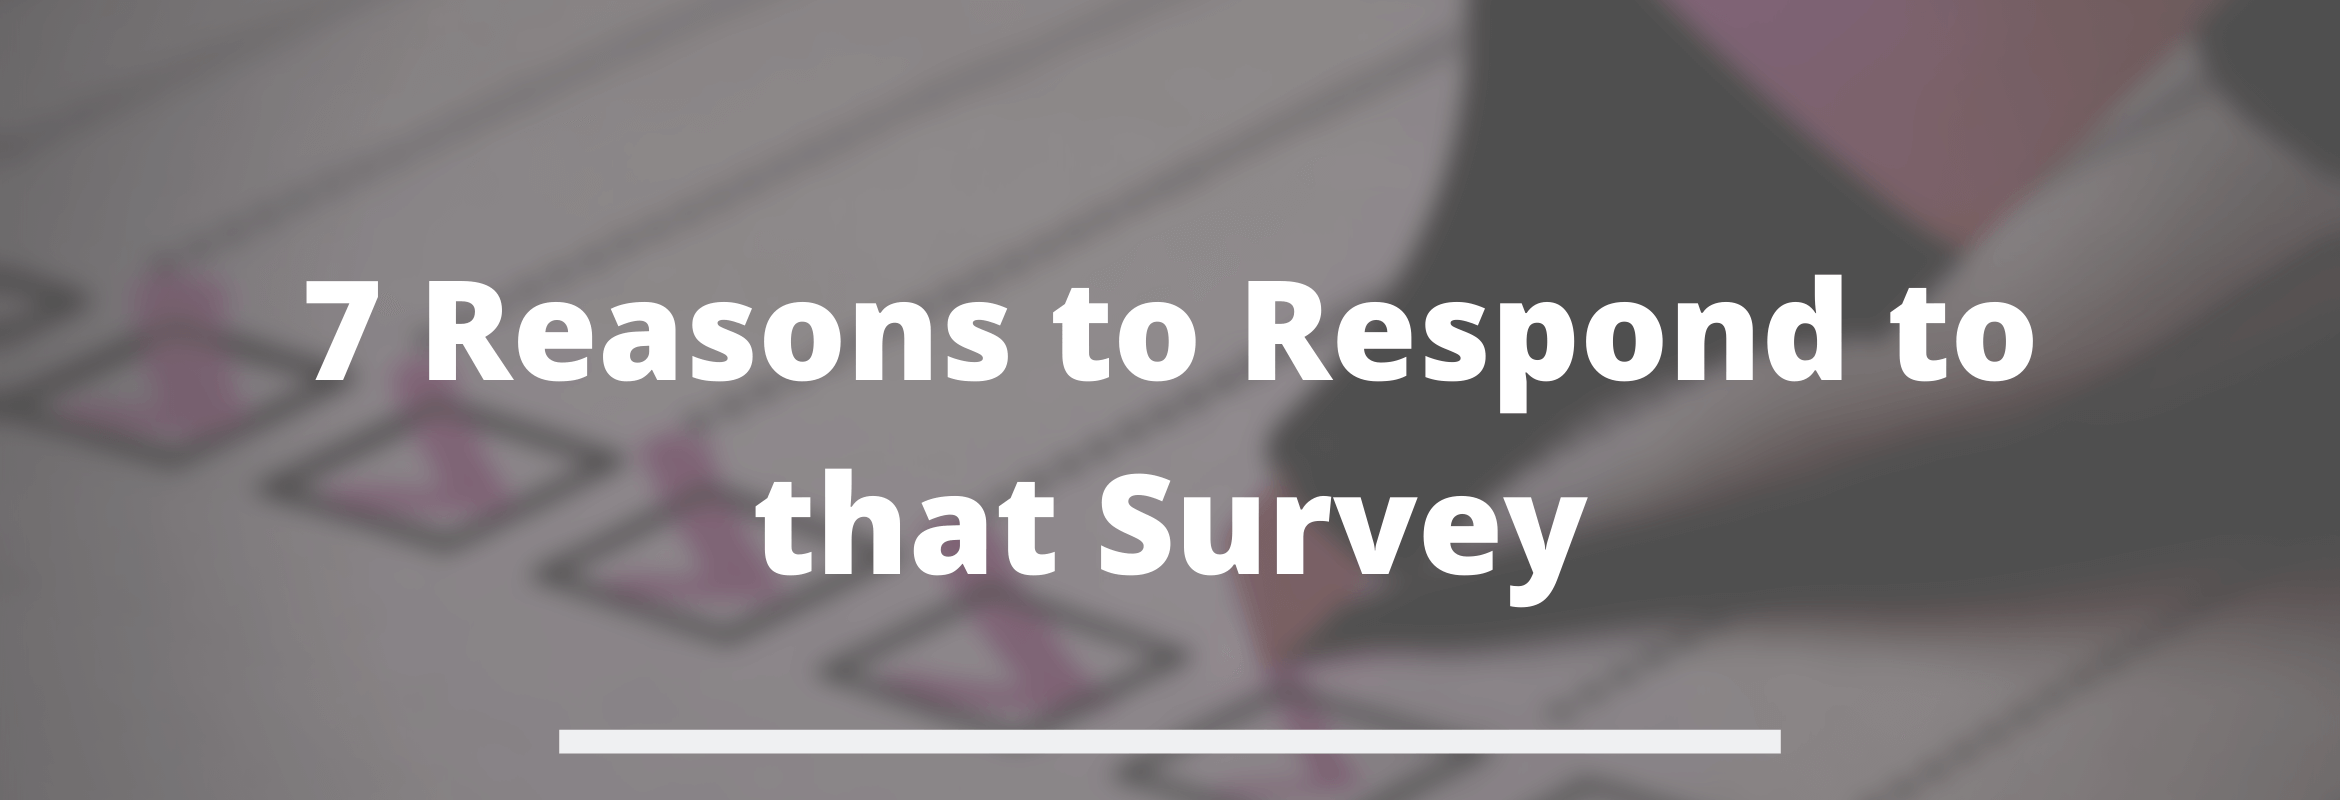 SIG is hosting a survey to find out what matters most to SIG members.